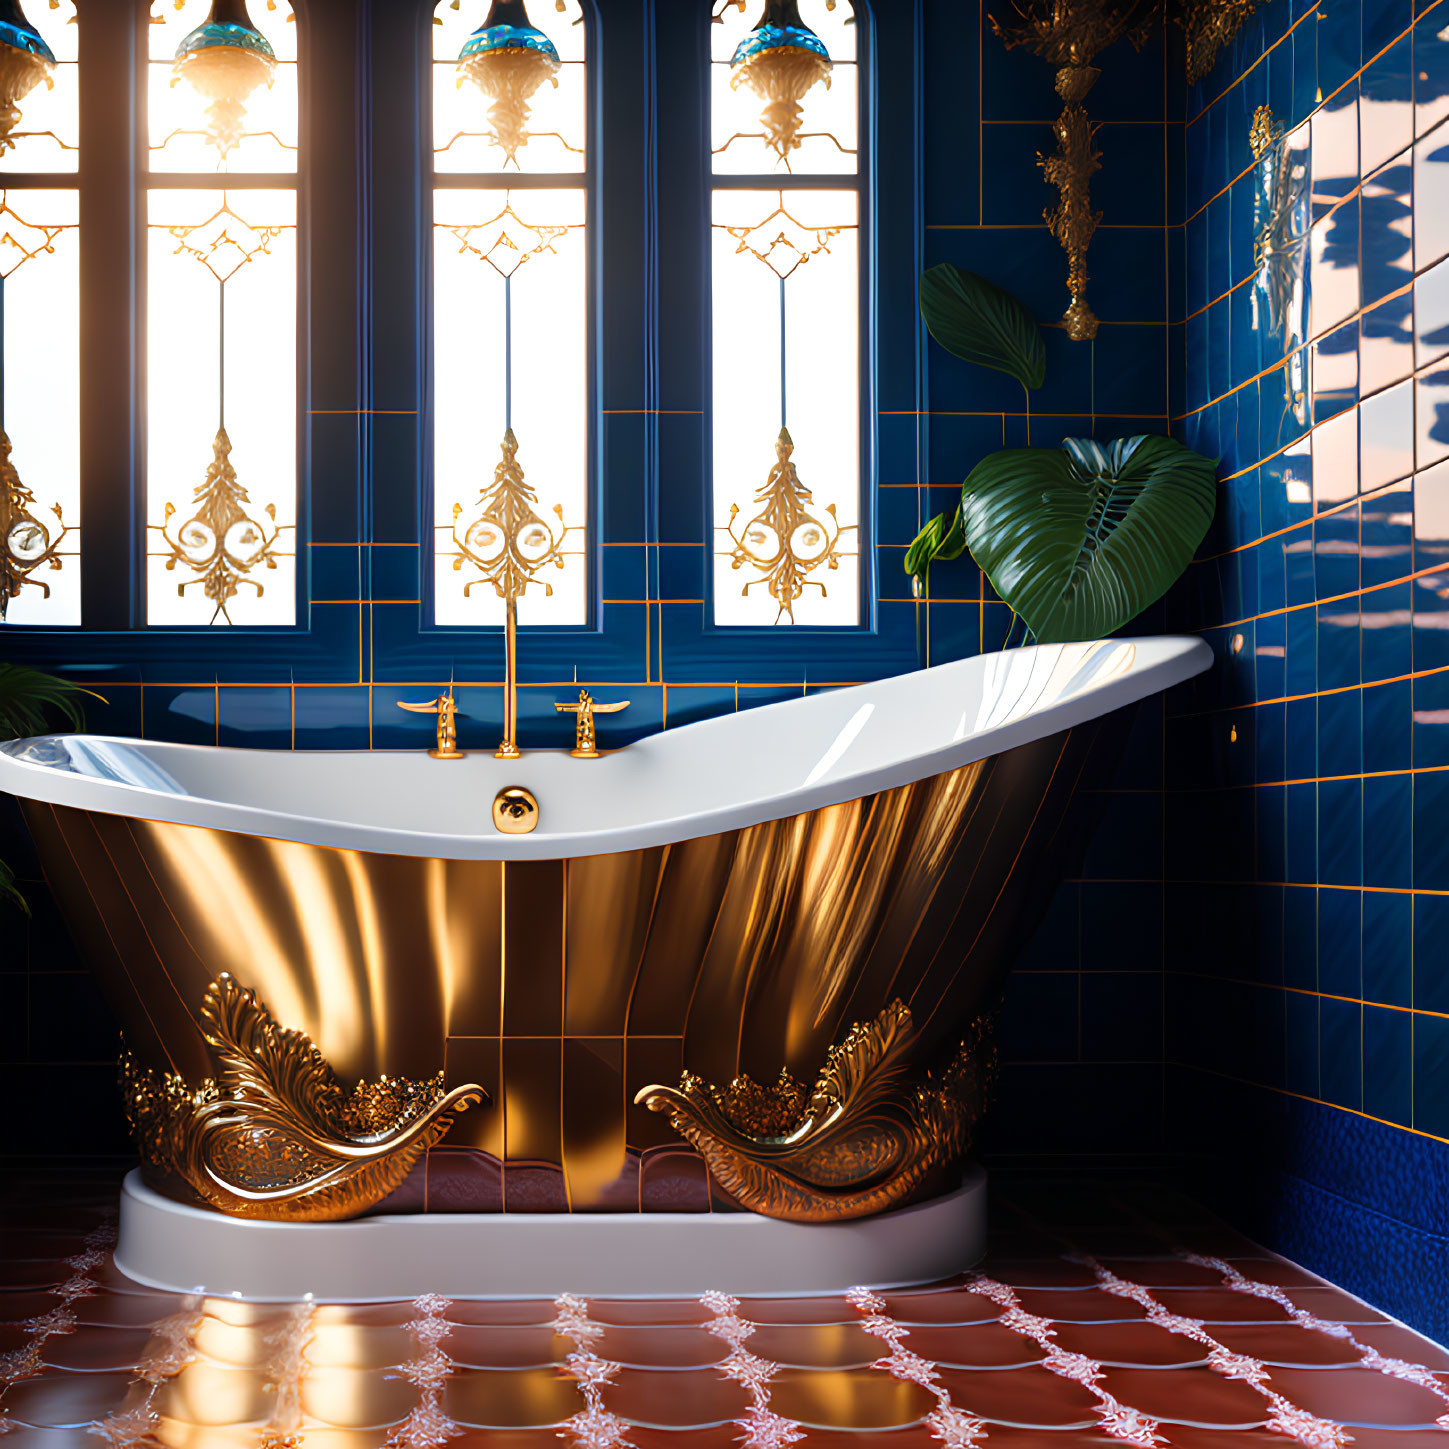 Luxurious Bathroom with Gold-Accented Bathtub & Ornate Decorations